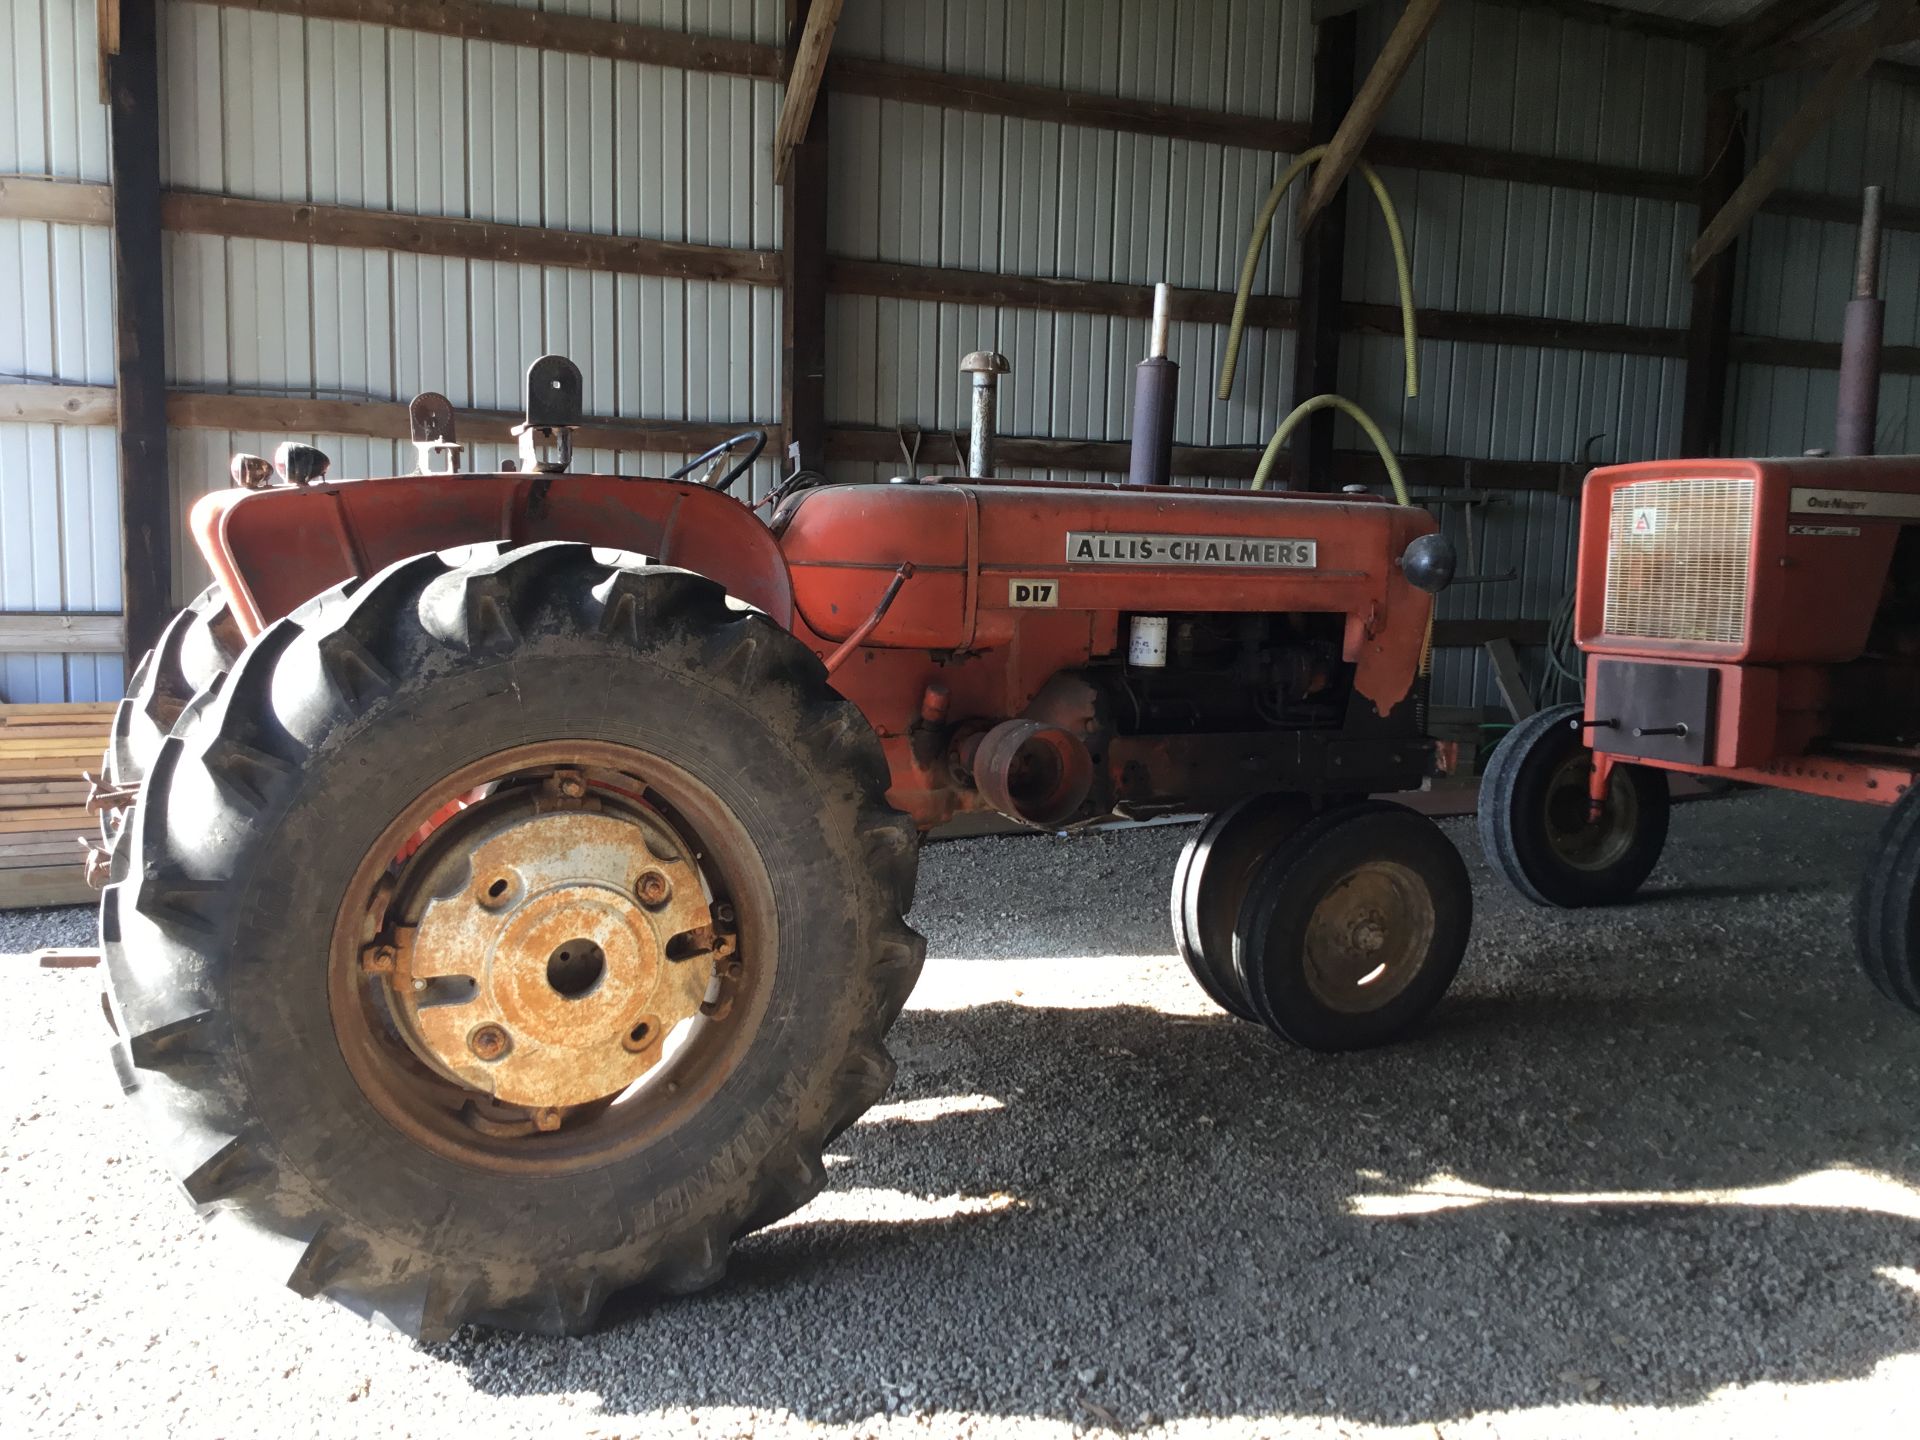 1959 Allis Chalmers D17, Gas, Narrow Front, 2 Pt. Hitch, 16.9-28 Rear Tires, 5900 Hrs., - Image 3 of 9